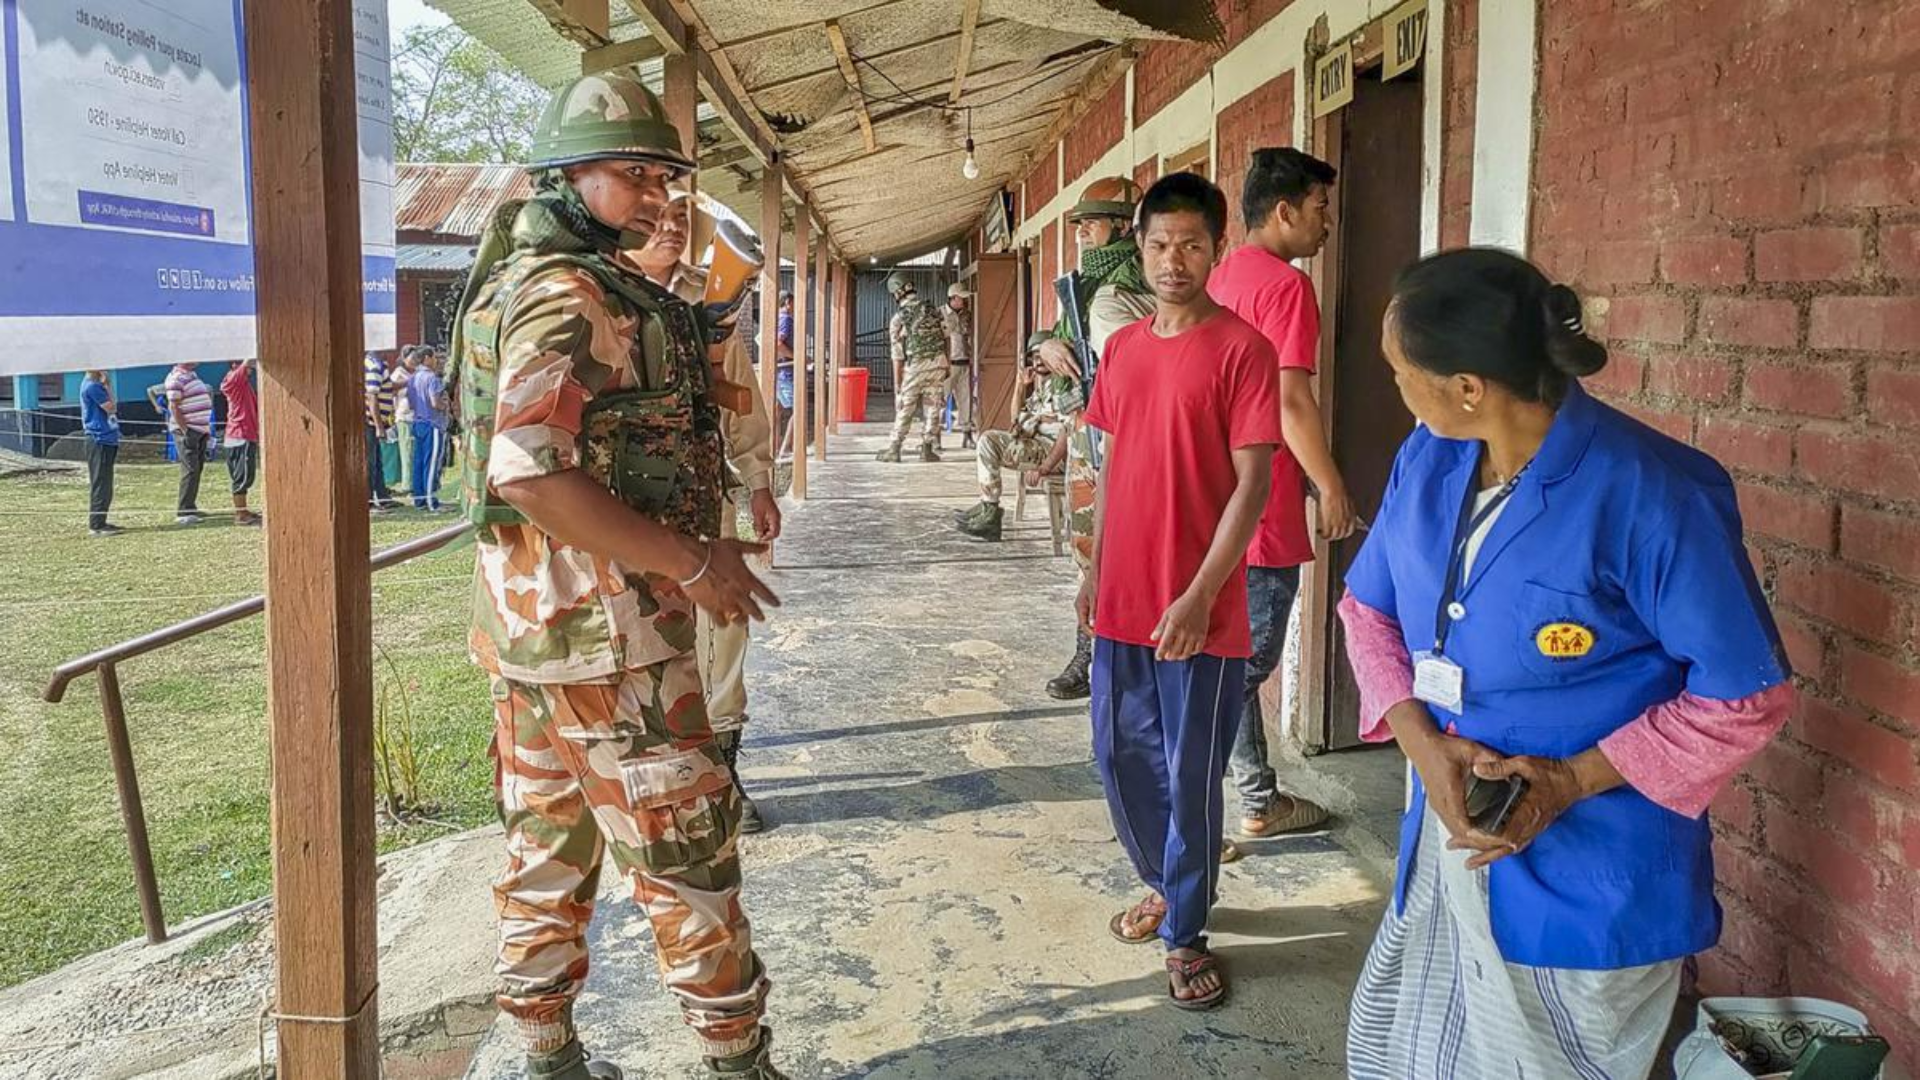 Manipur Election Marred by Ethnic Violence and Low Turnout Amidst Incidents of Vandalism and Intimidation